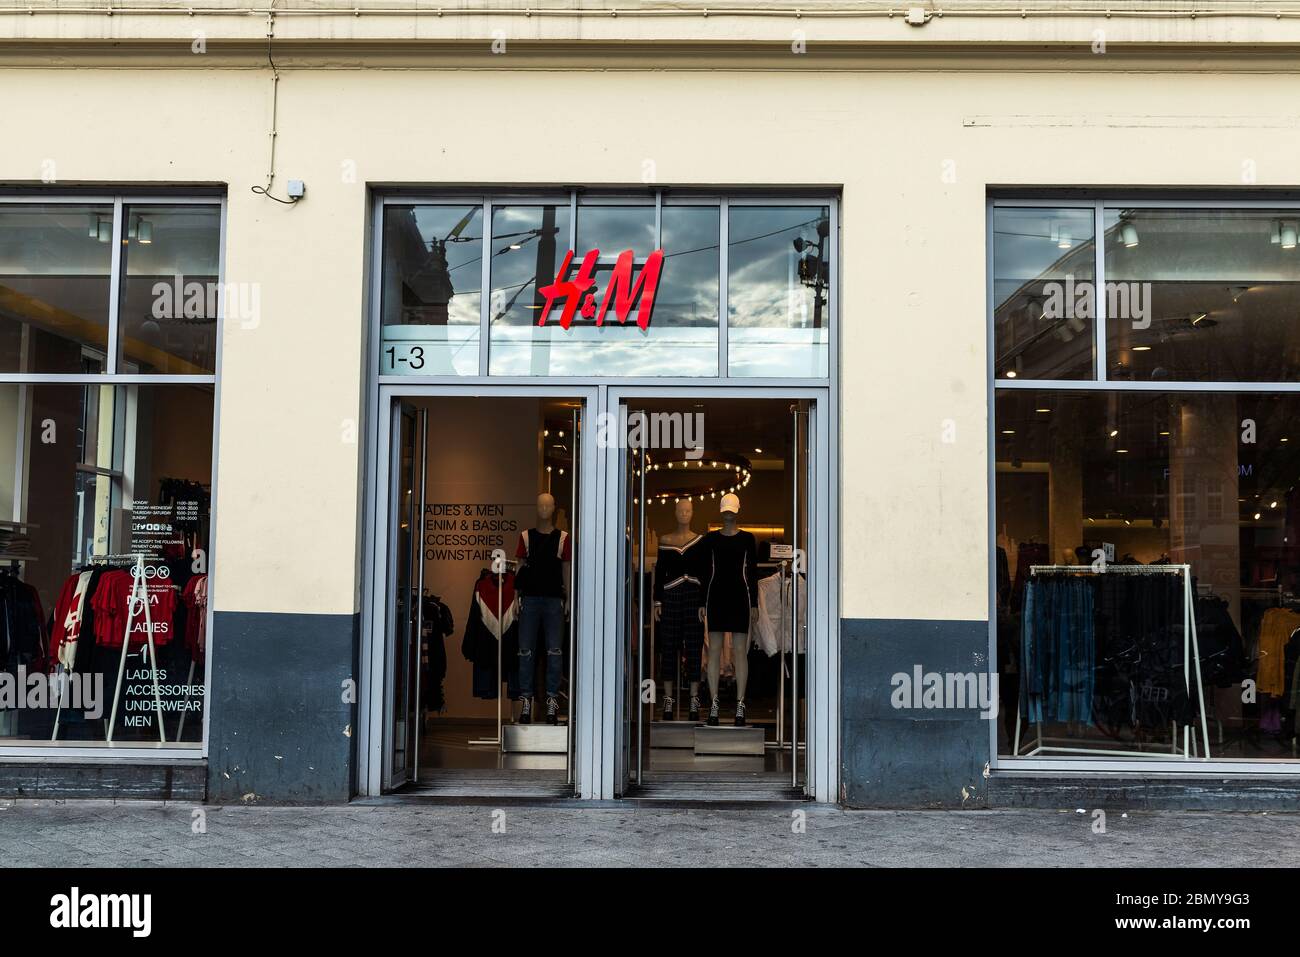 Amsterdam, Netherlands - September 9, 2018: Facade of a HM clothing store  in the center of Amsterdam, Netherlands Stock Photo - Alamy